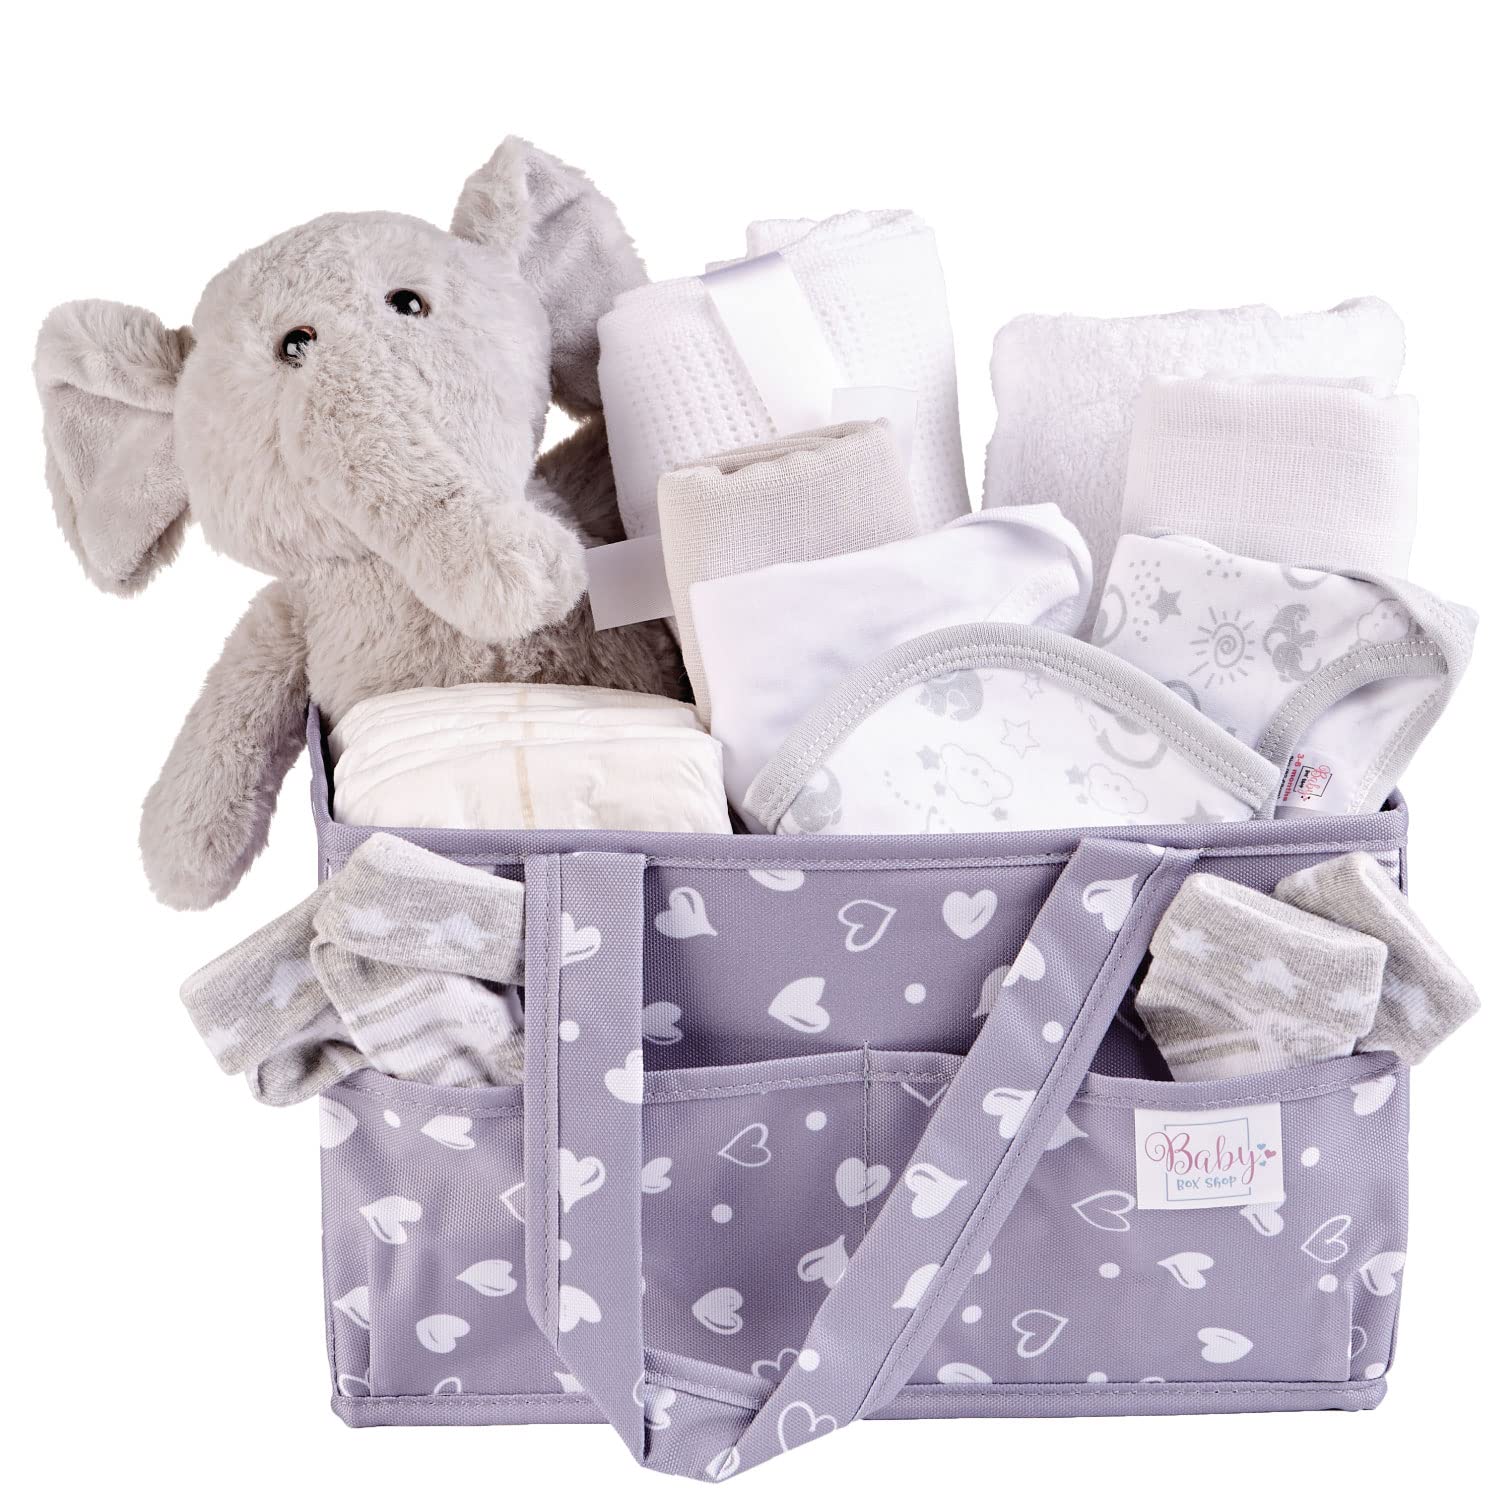 Newborn Baby Gifts Nappy Caddy Set – Washable Multi-Functional Grey Caddy Bag to Store and Organise Baby Essentials Like Nappies, Wipes, Cream, Toys, Bottles, Bottle Warmer, etc.